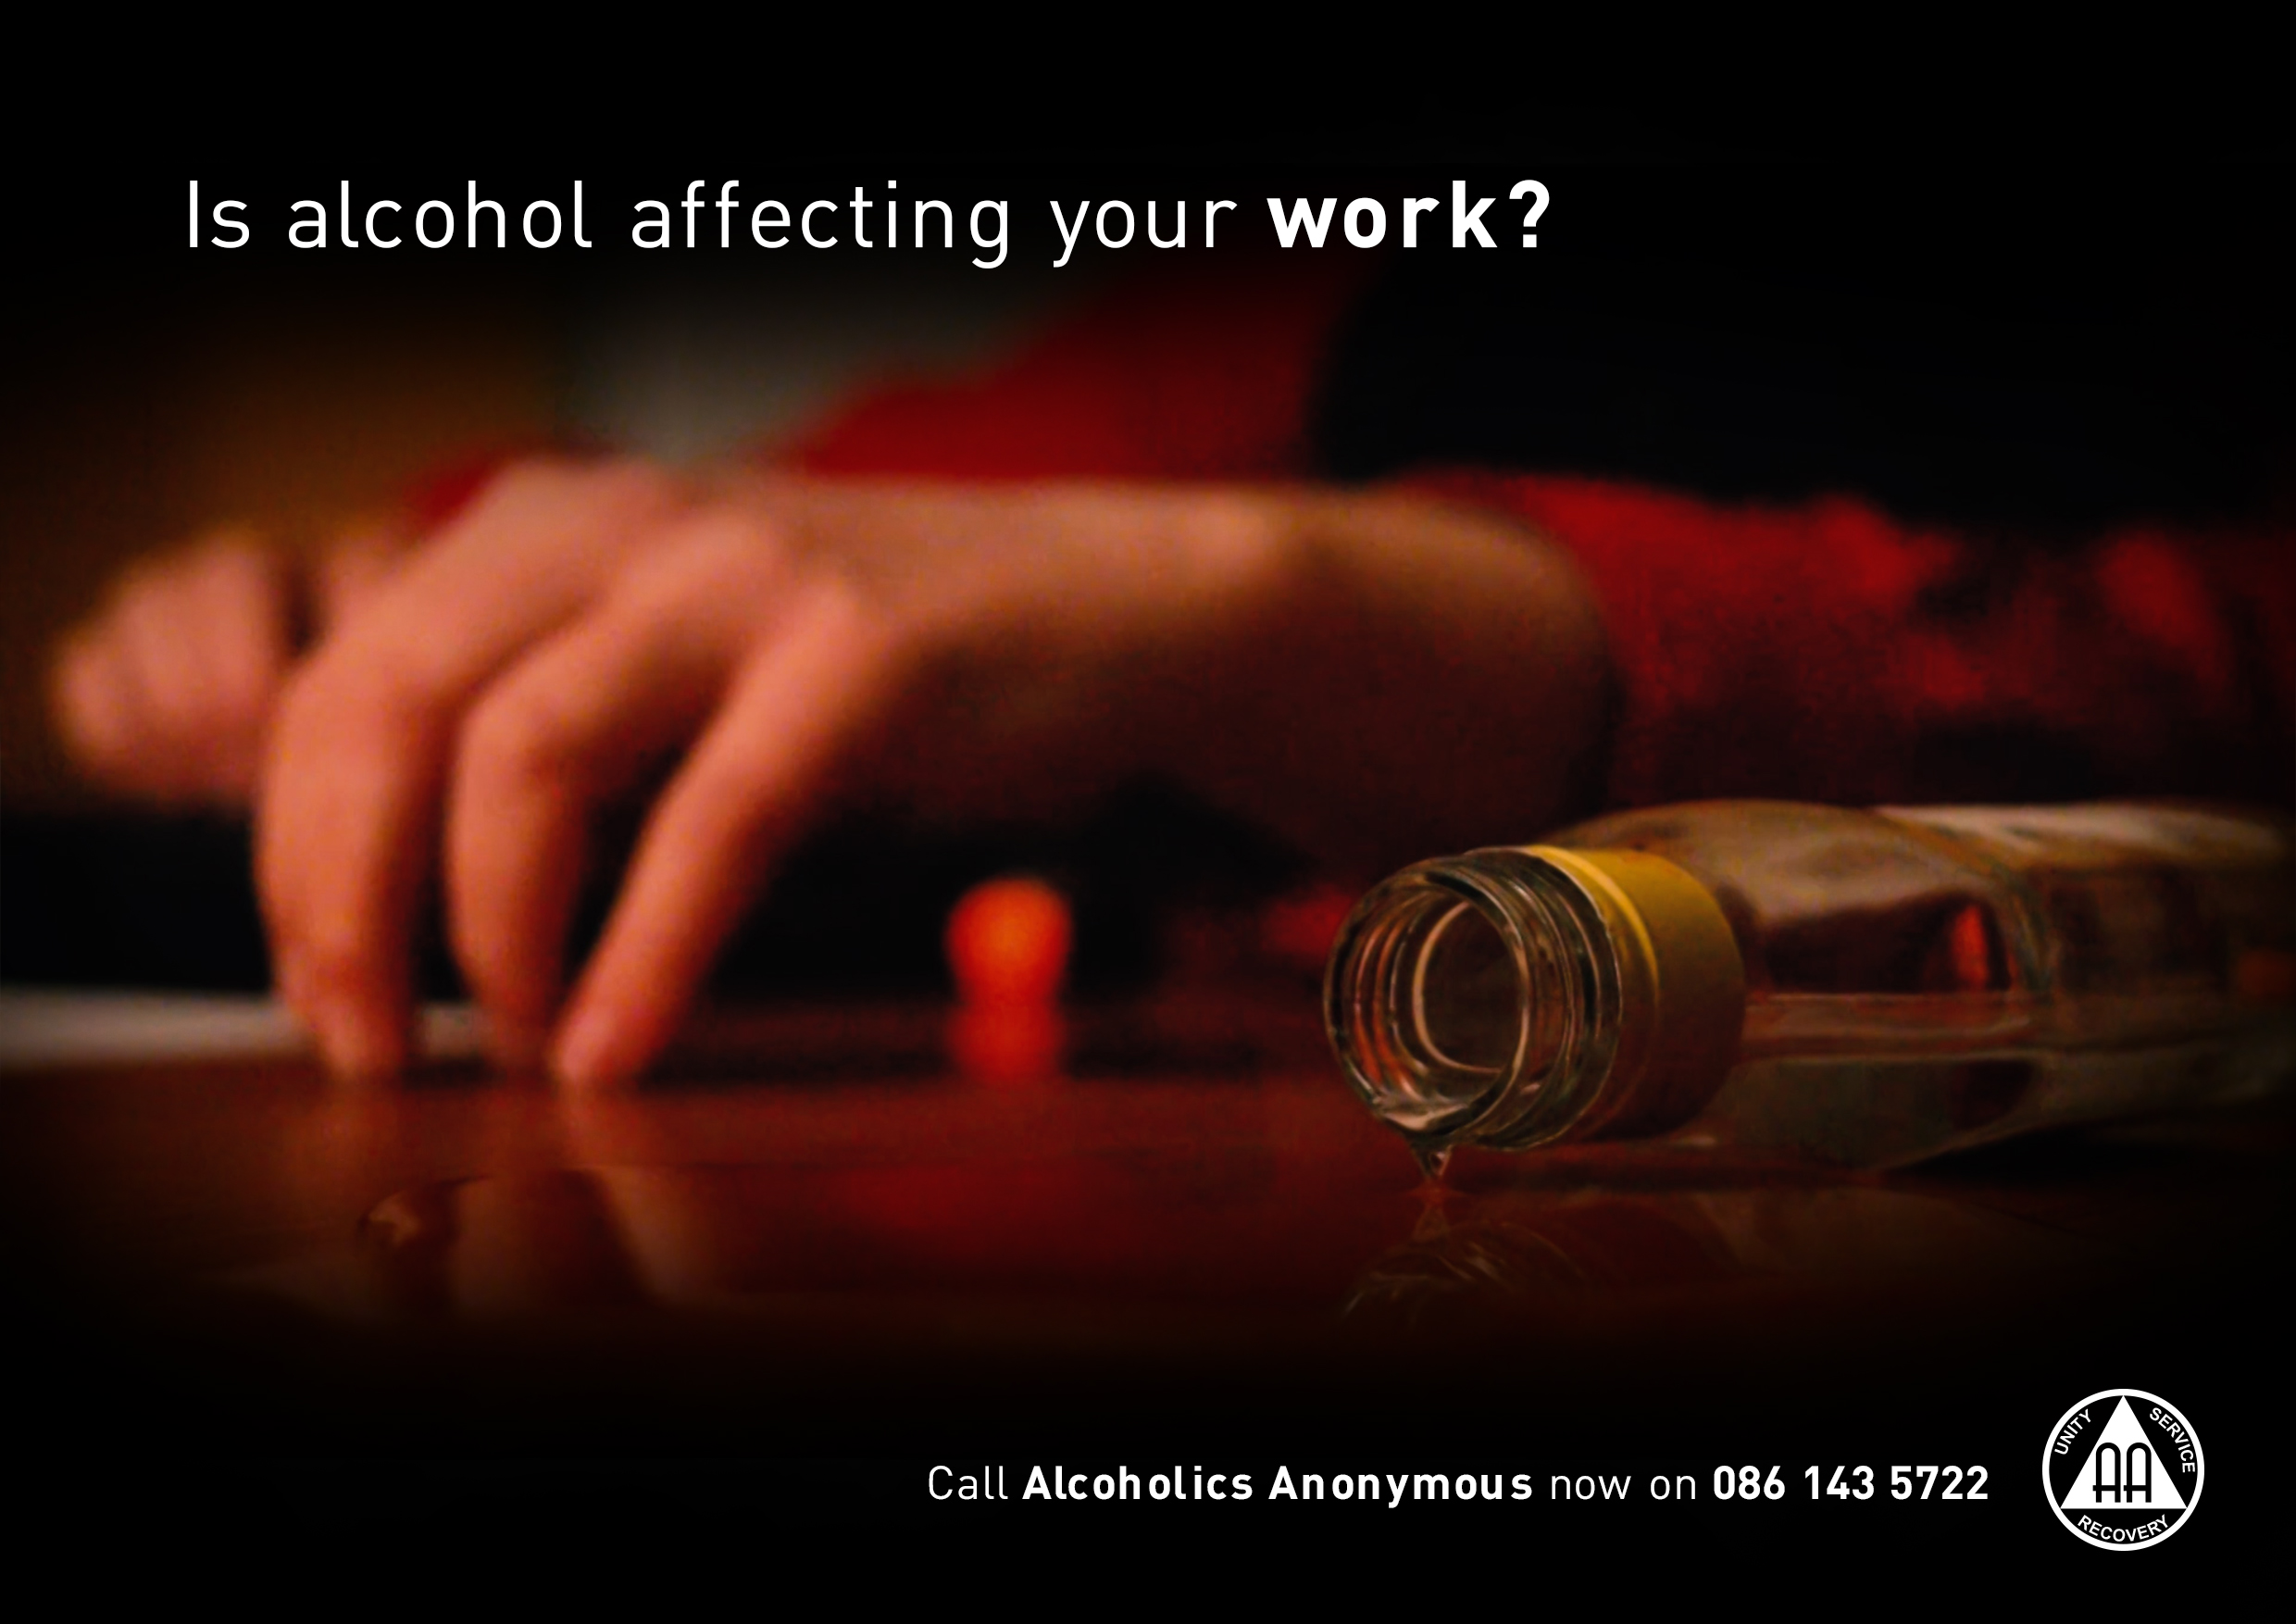 Alcoholics Anonymous South Africa